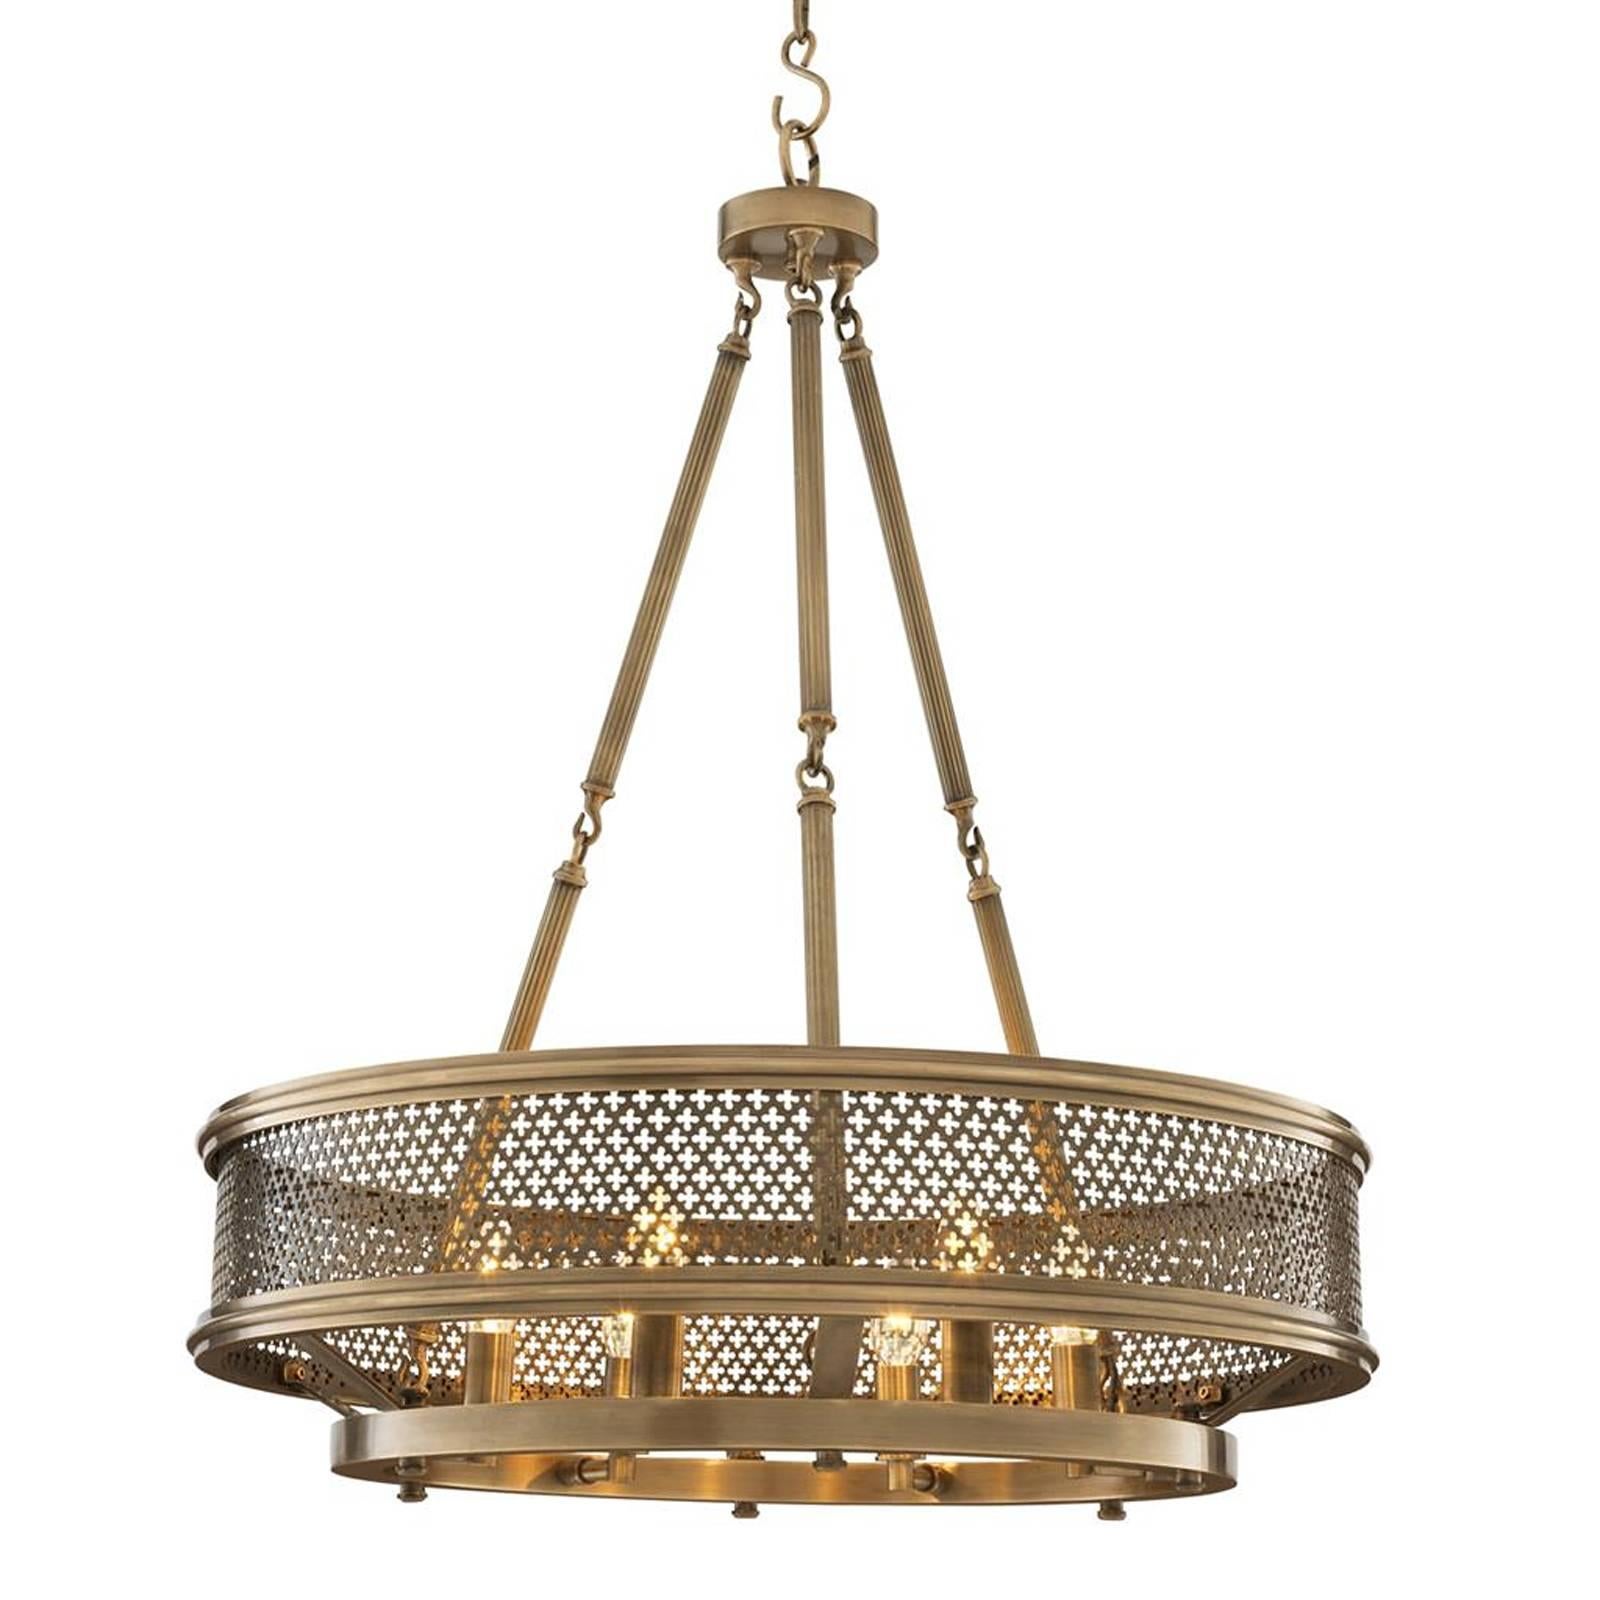 Chandelier clover with structure in antique brass finish.
Six bulbs, lamp holder type E14, max 40 watt. Bulbs not
included. Adjustable chain: 200 cm.
